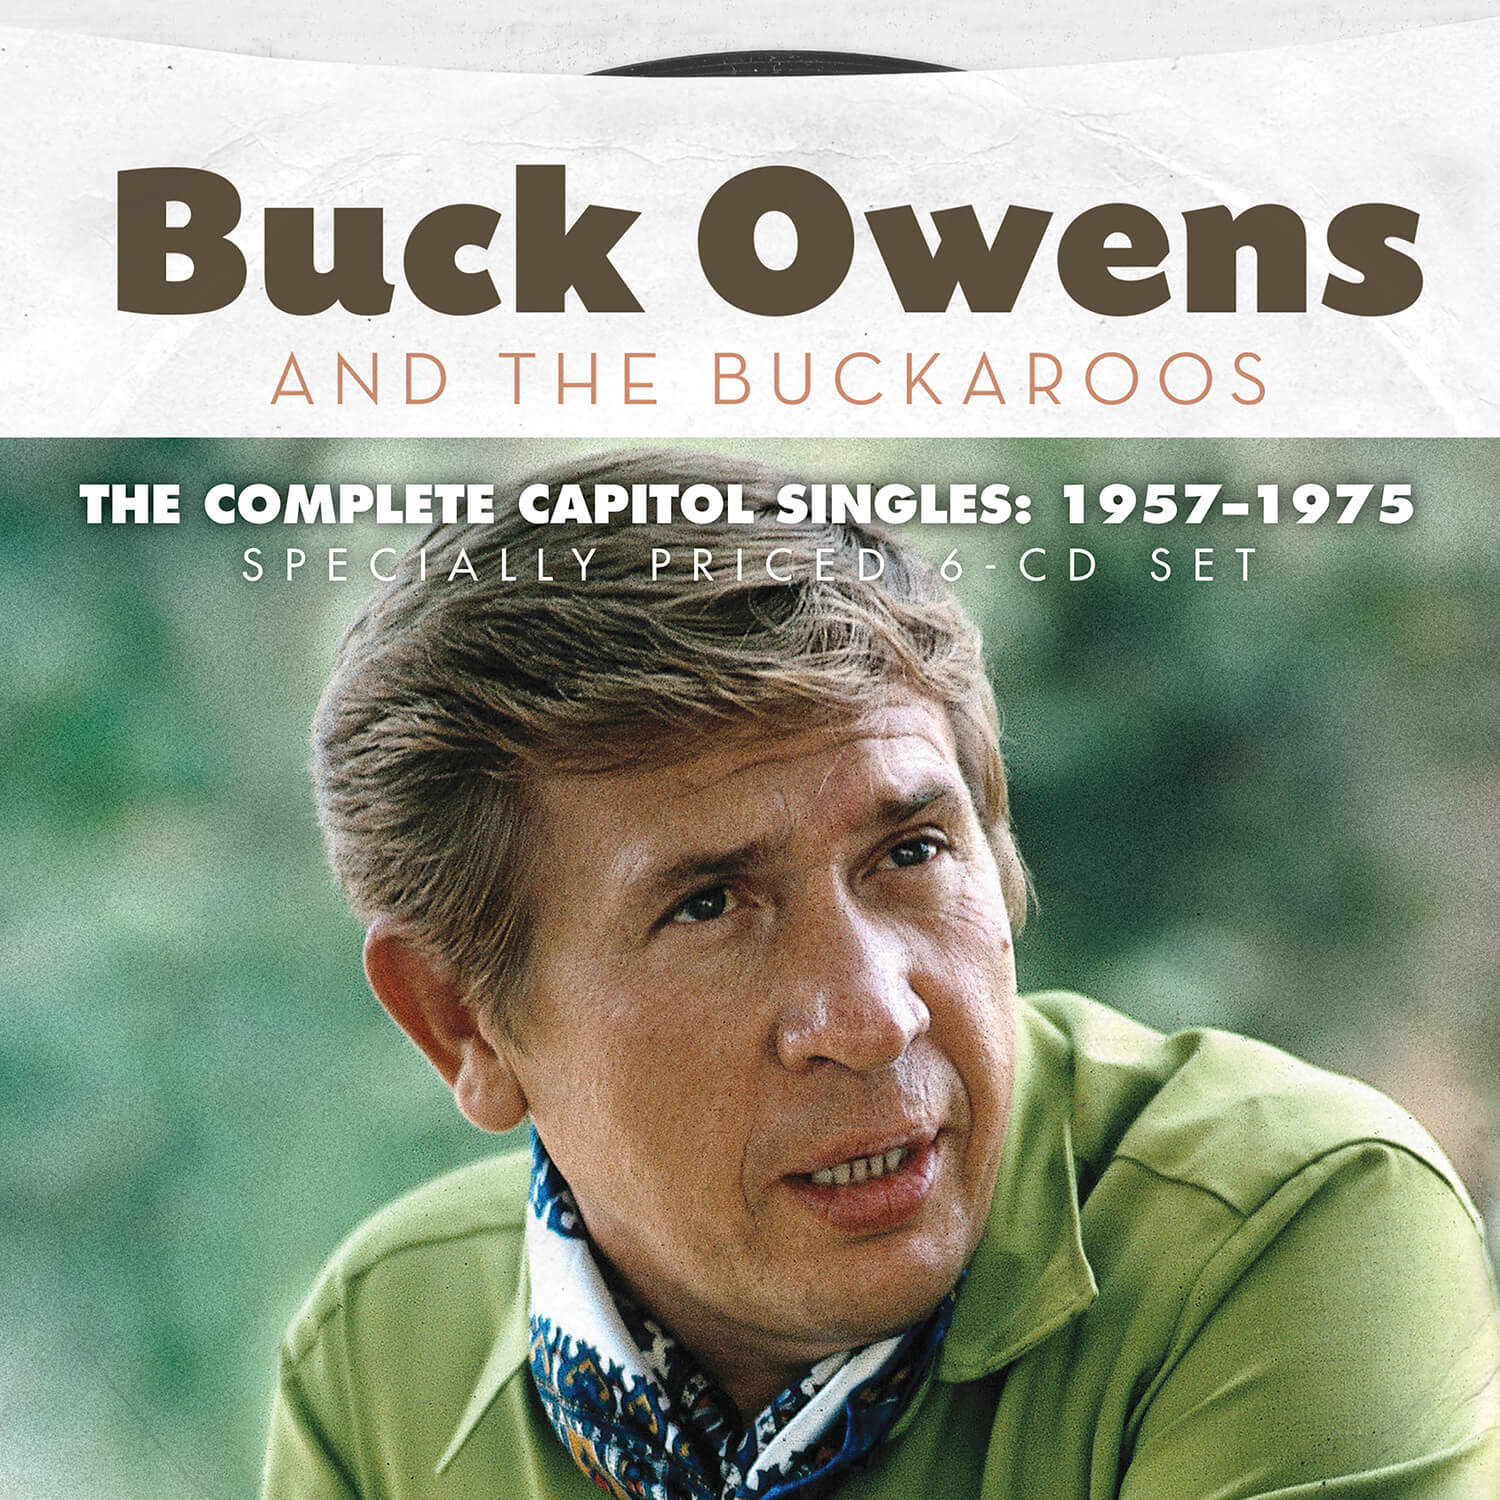 The Complete Capitol Singles: 1957-1975